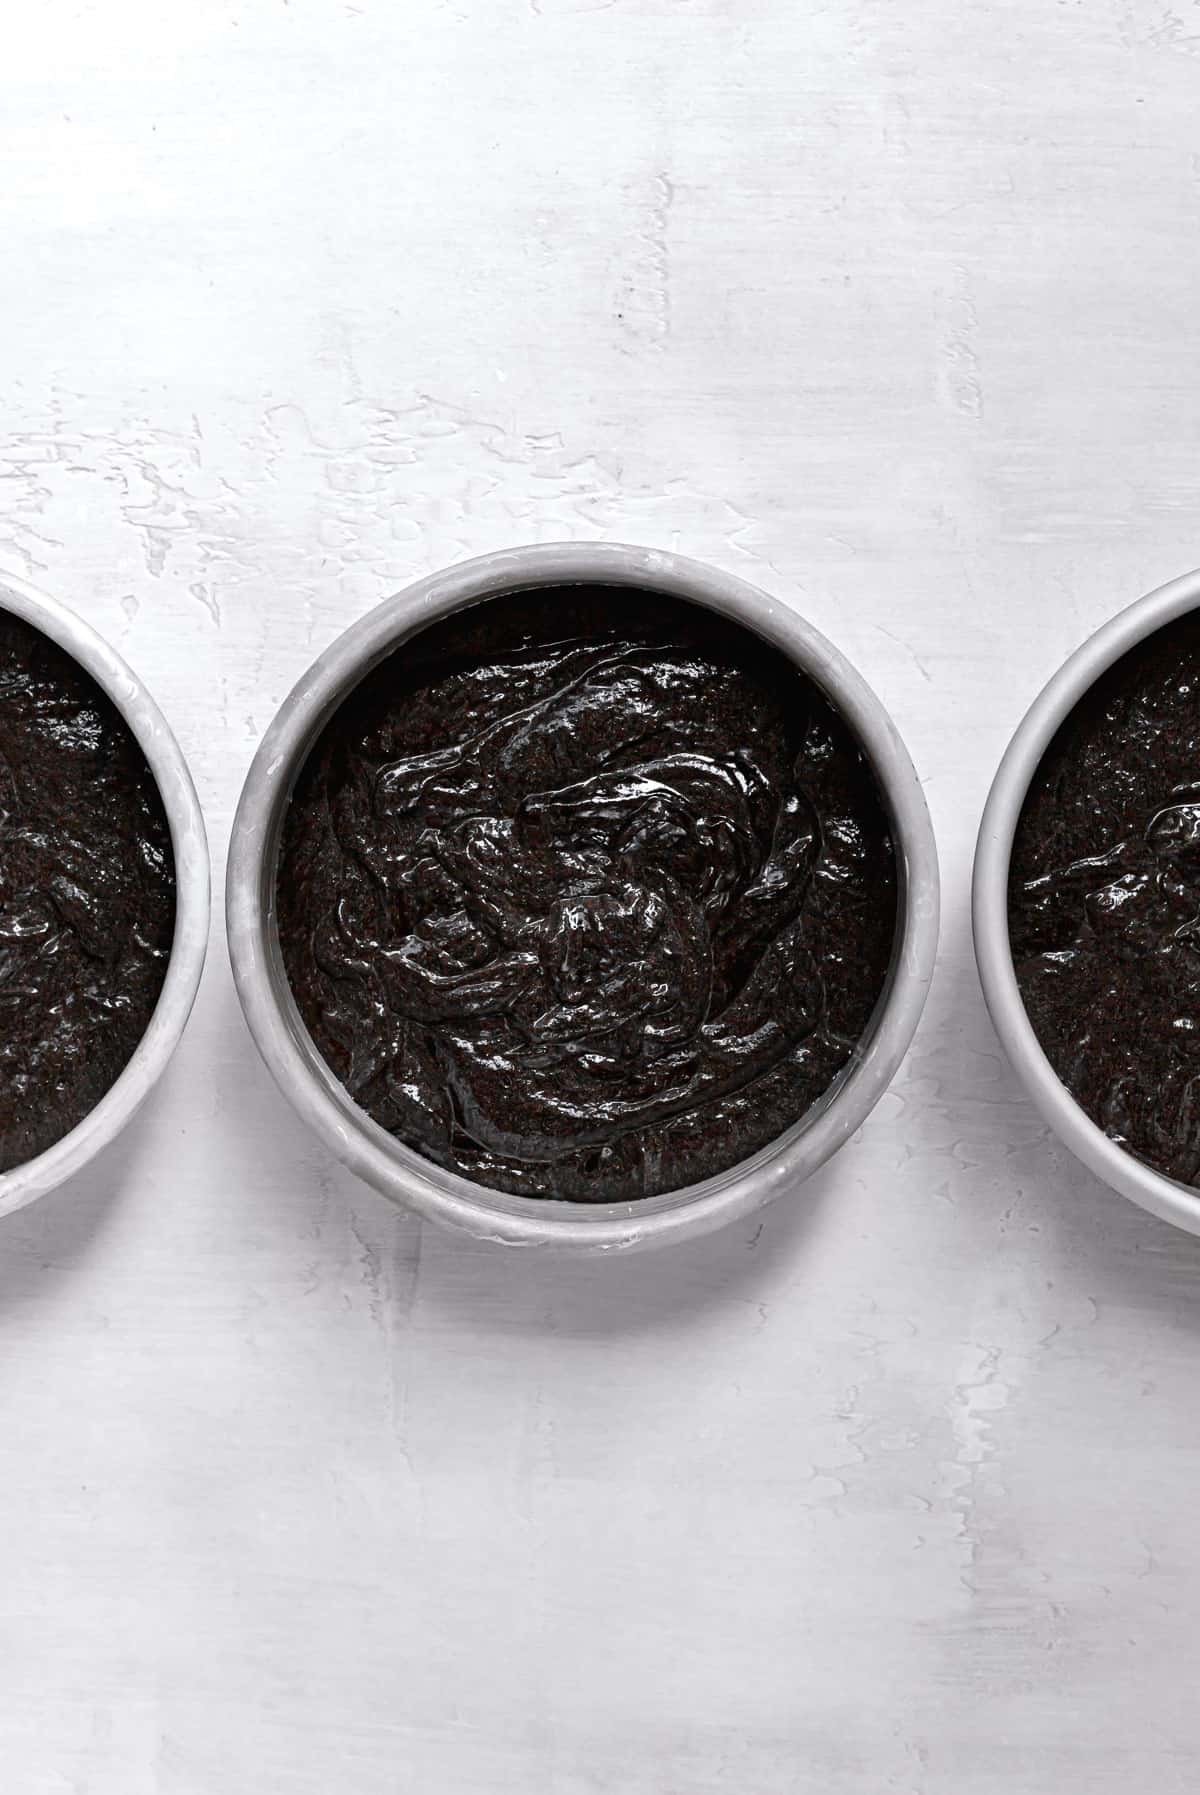 black cocoa cake batter in 6 inch cake pans.